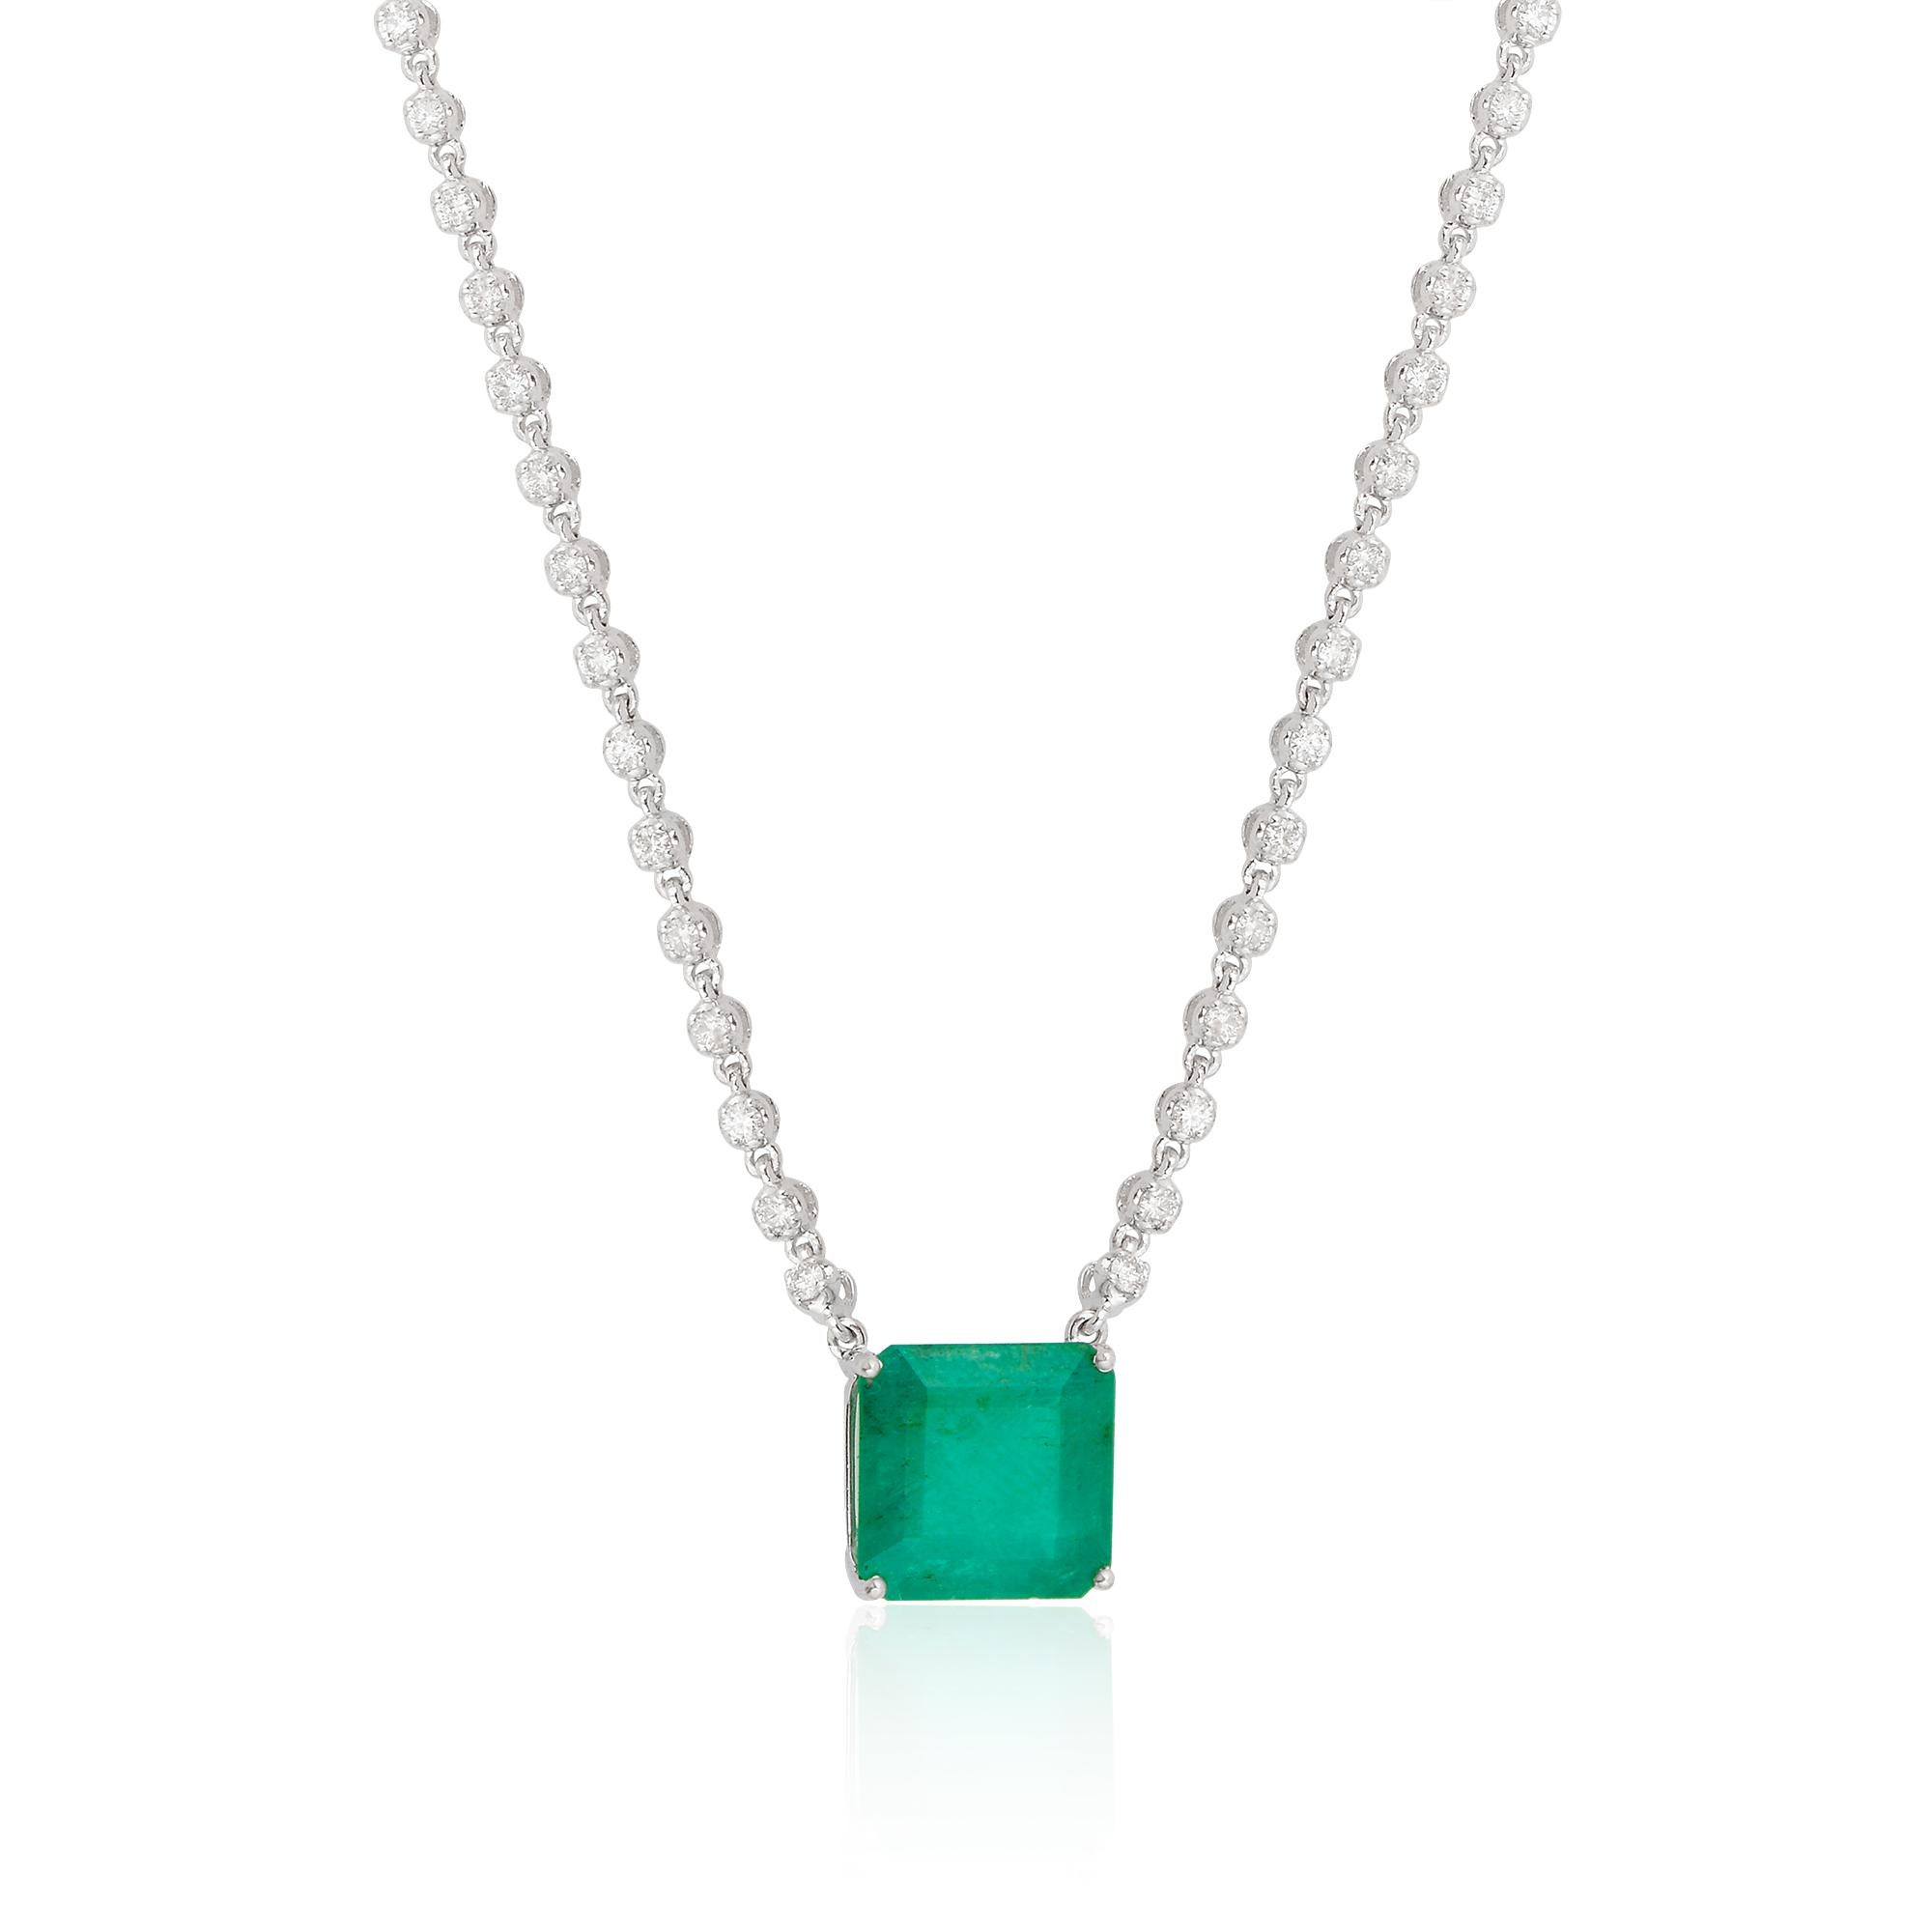 This exquisite Zambian Emerald Gemstone Charm Necklace is a true masterpiece of fine jewelry. Crafted in 18 karat white gold, this necklace exudes elegance and sophistication. The focal point of this stunning piece is a mesmerizing Zambian emerald